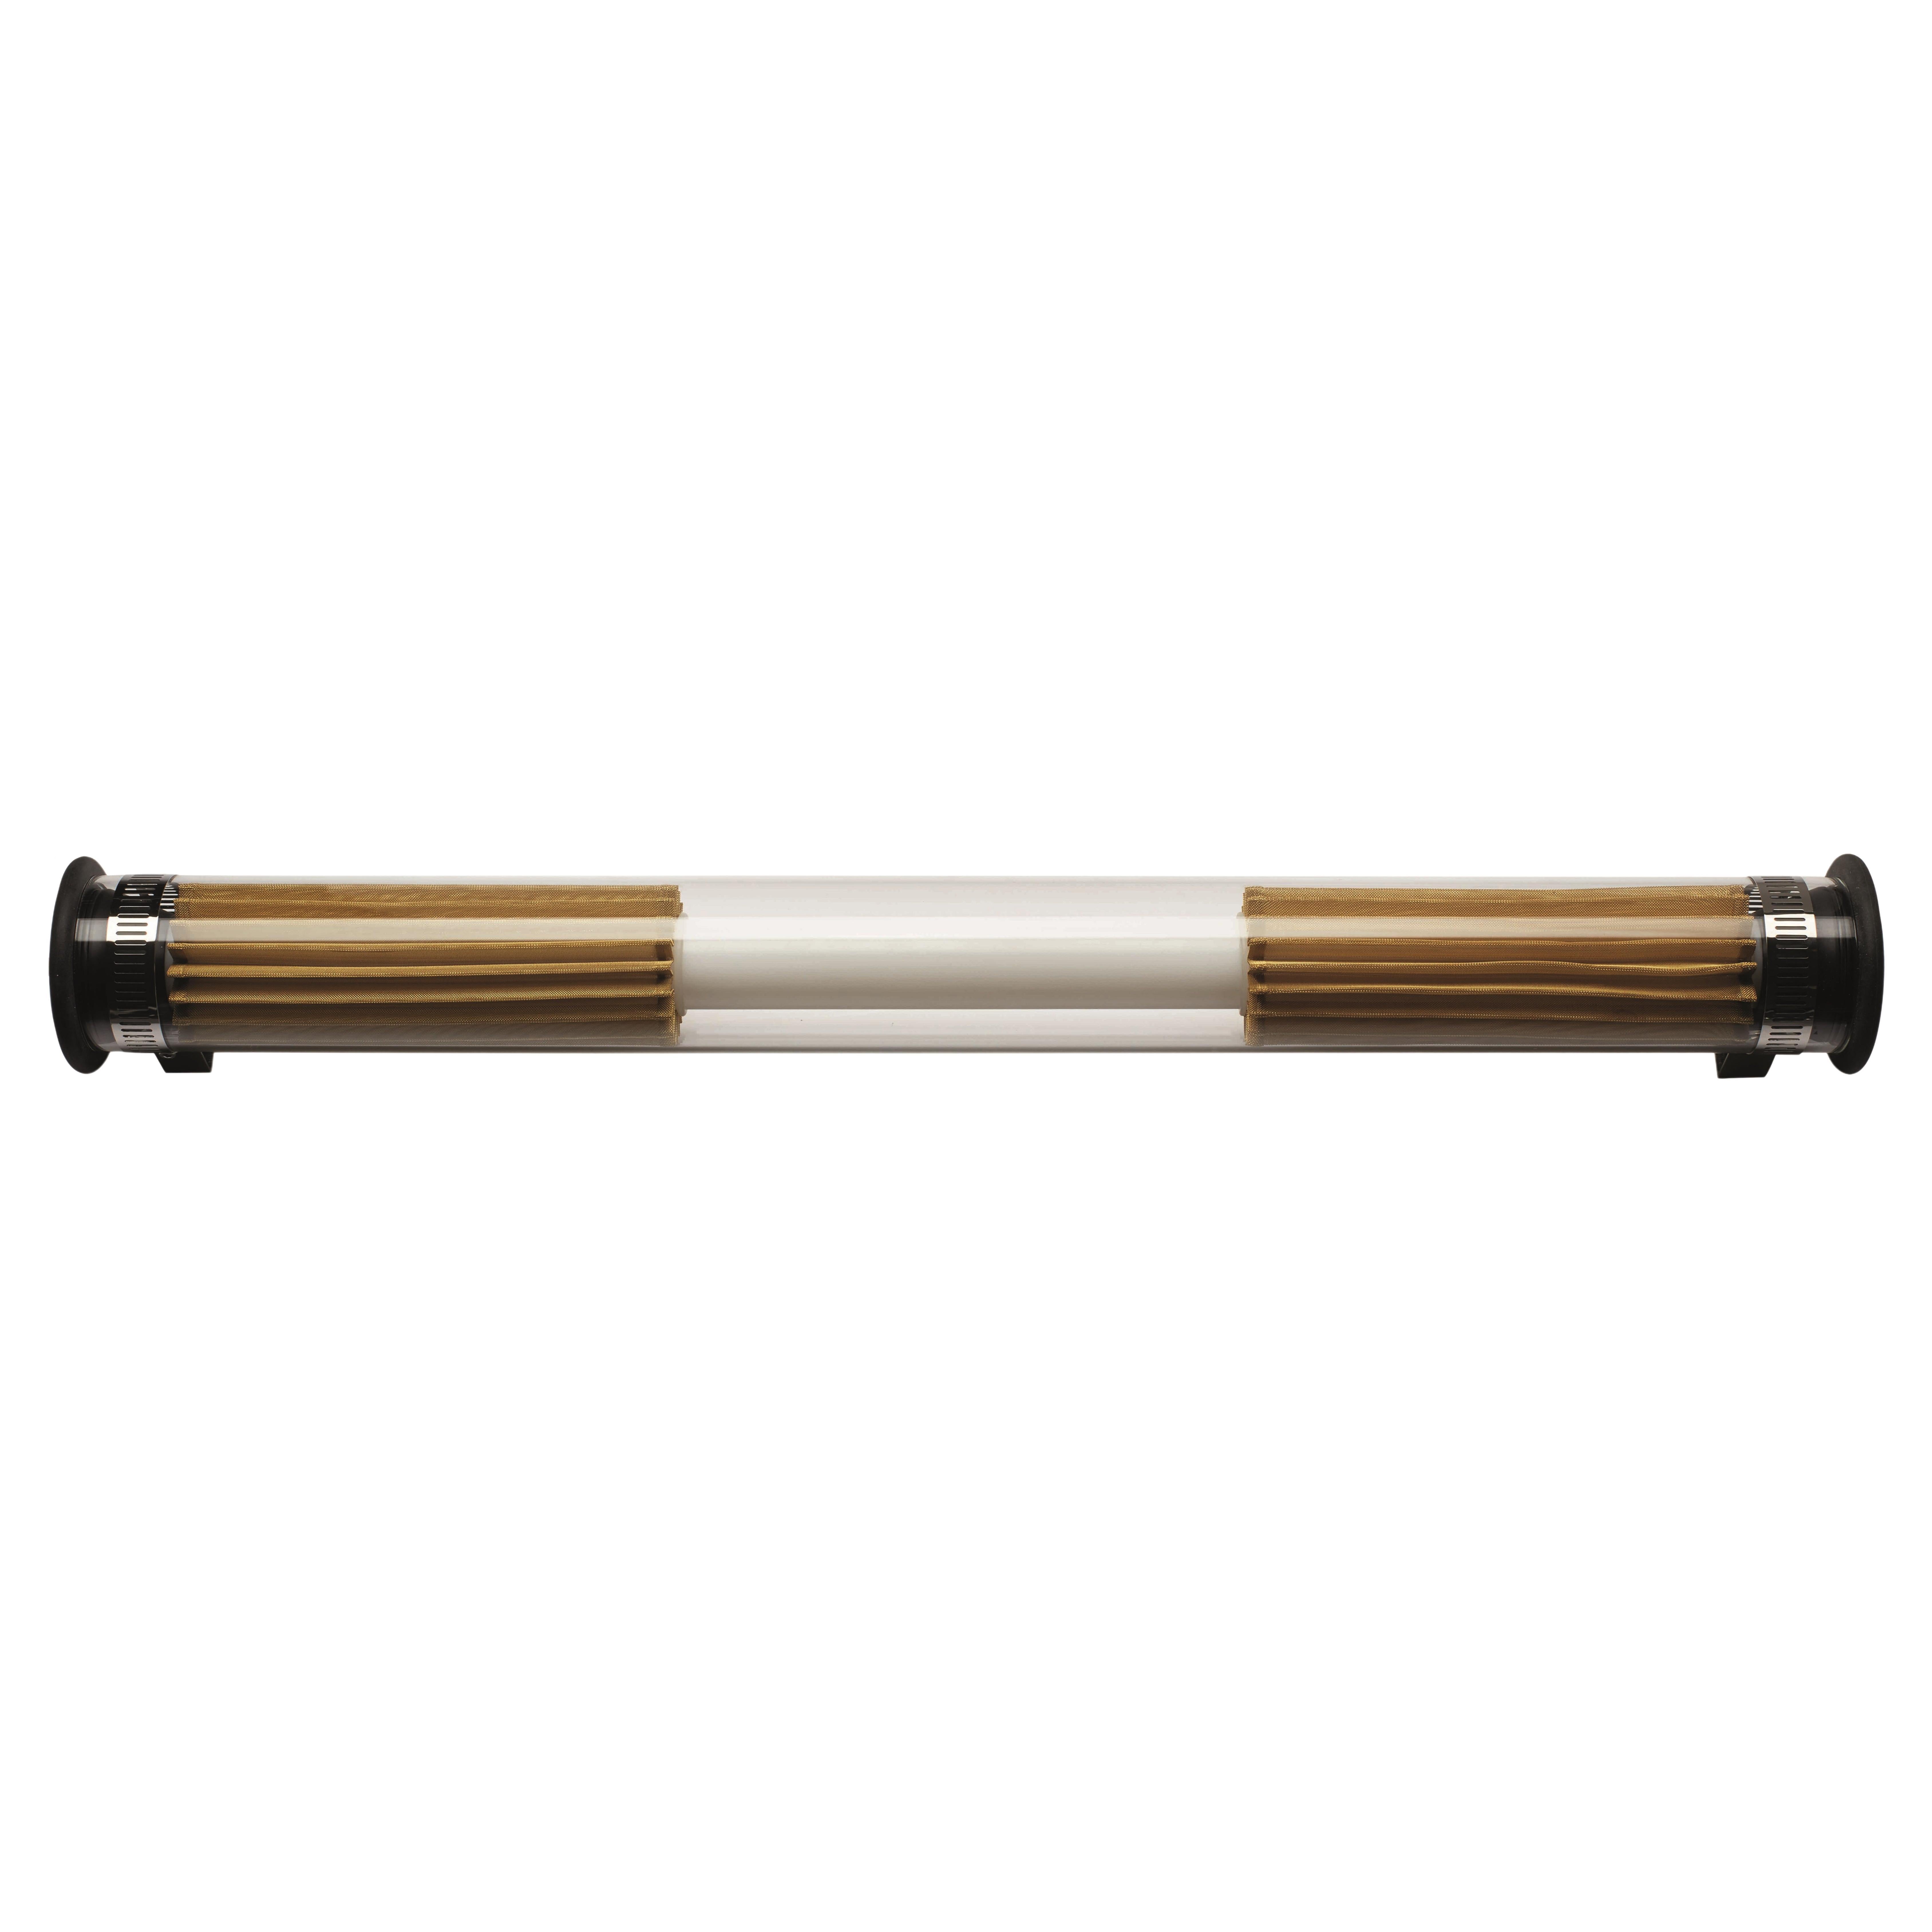 DCW Editions In The Tube 360° 700 Wand- und Pendelleuchte in Gold Mesh